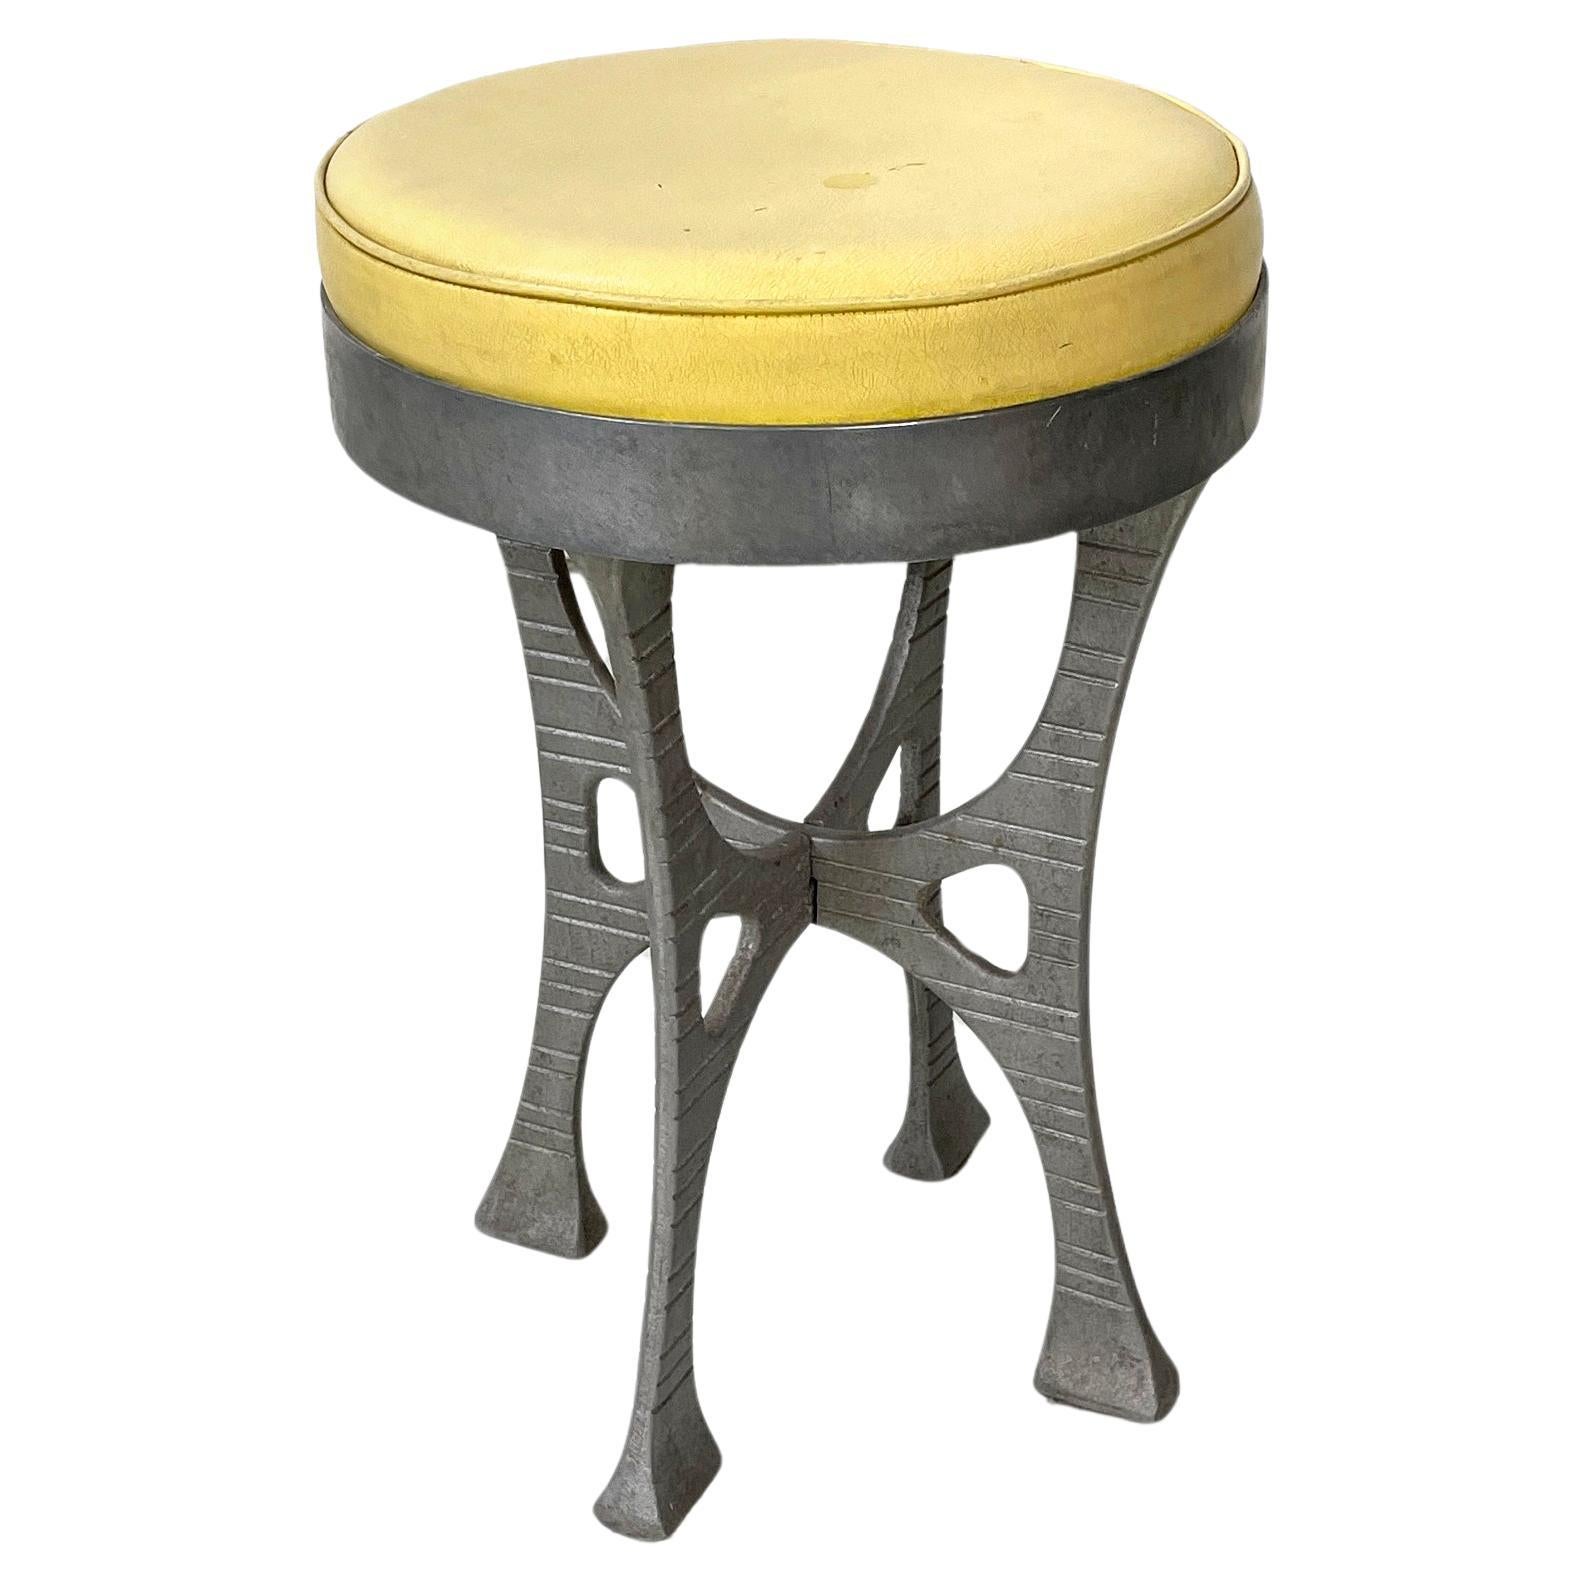 Italian Round stool in yellow leather and aluminium, 1940s For Sale